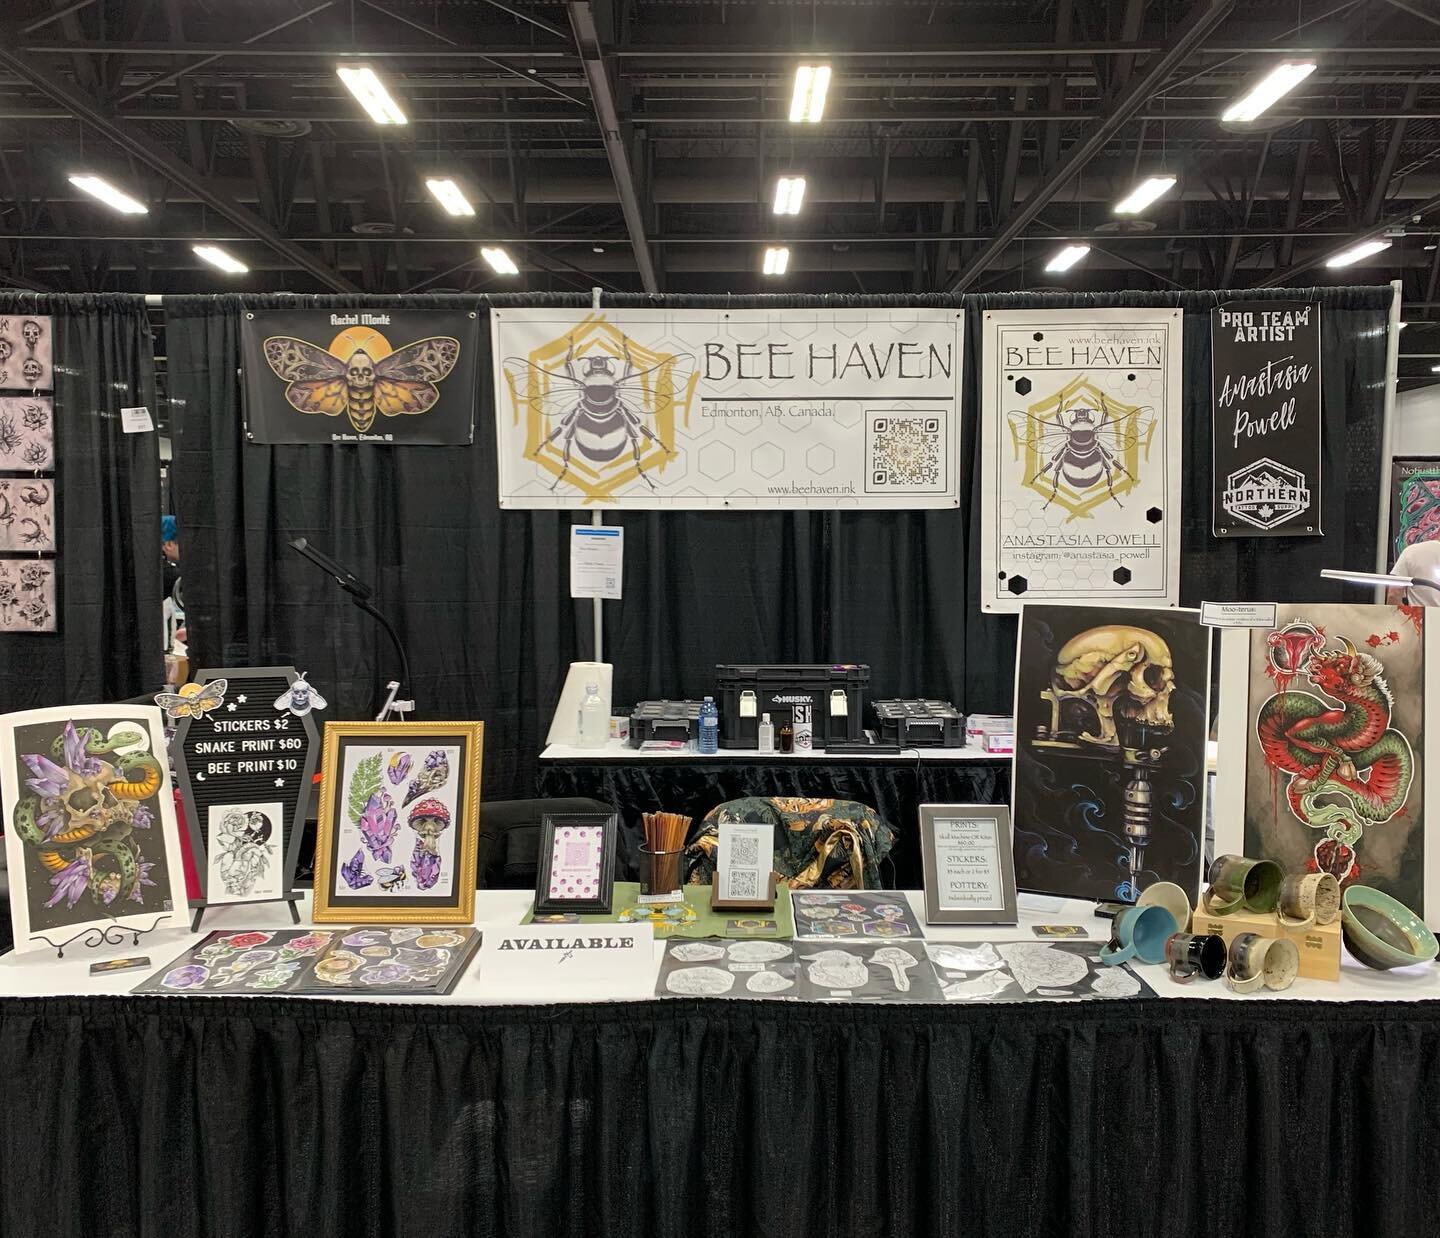 We&rsquo;re all set up at the @edmontontattooshow and ready to tattoo! Come say hi and get a tattoo! 

#tattoo #tattooartist #yegtattoo #yegtattooartist #albertatattoo #edmonton #edmontontattoo #yeg #flashtattoo #neotrad #neotraditional #illustrative